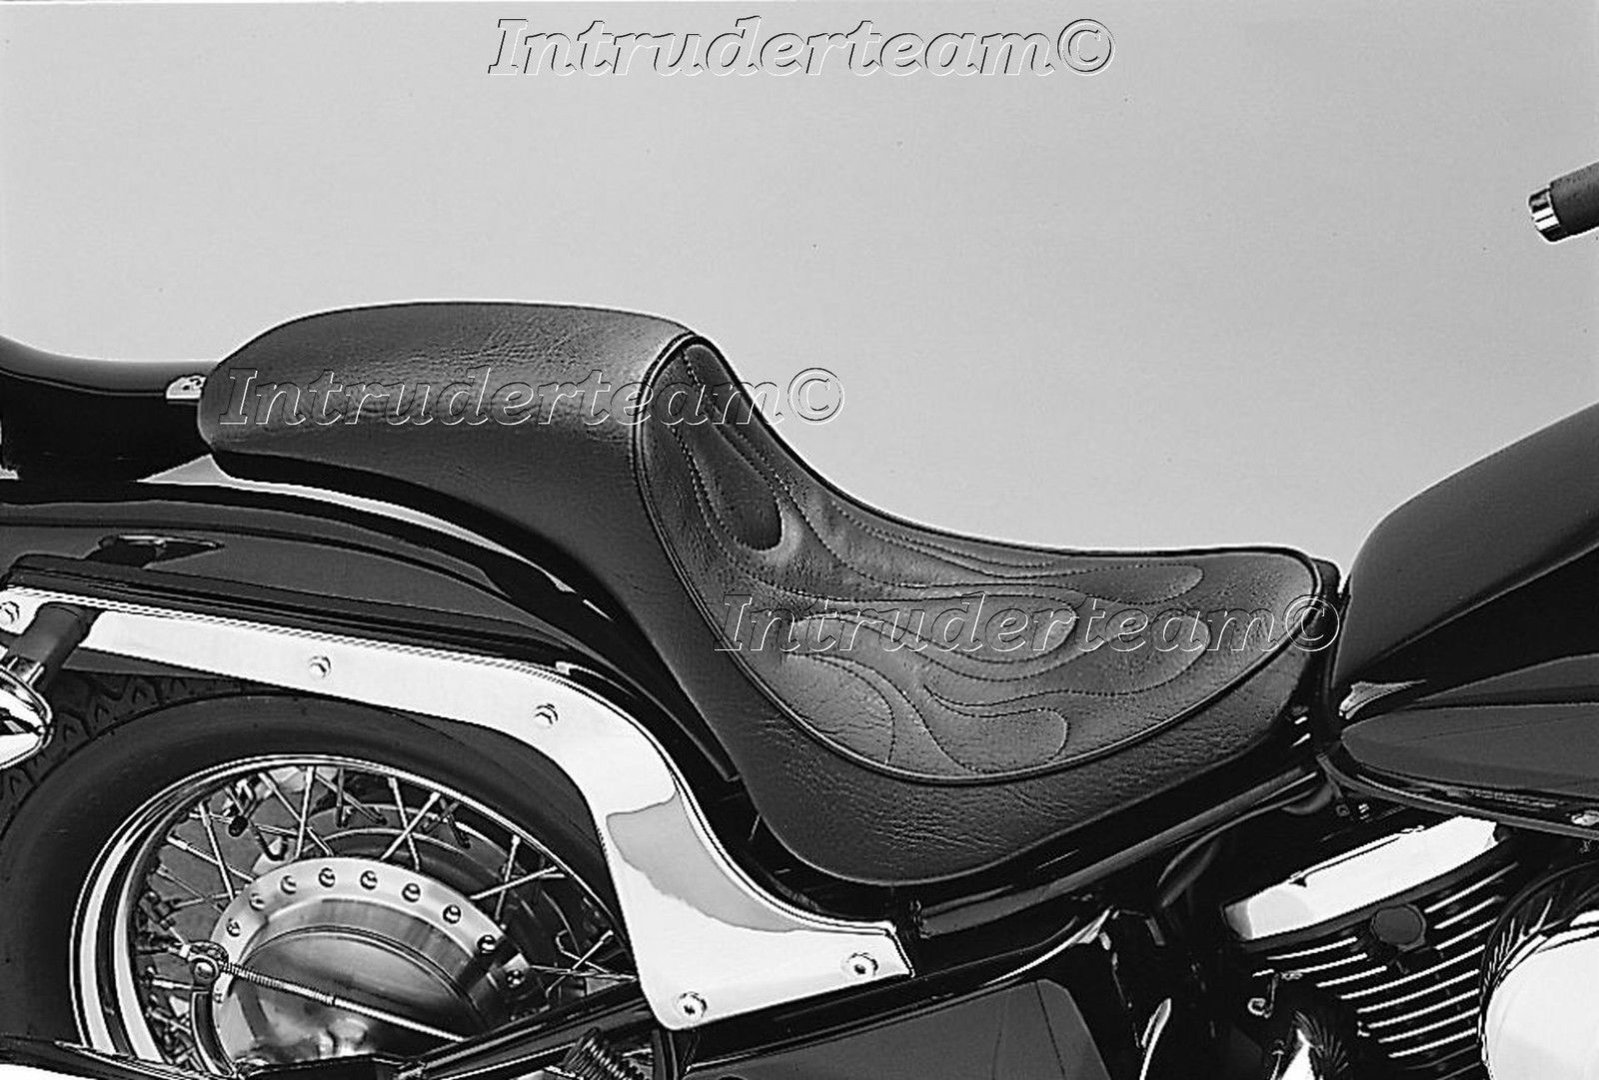 EASY seat bench Racer VN800 VN800 Classic